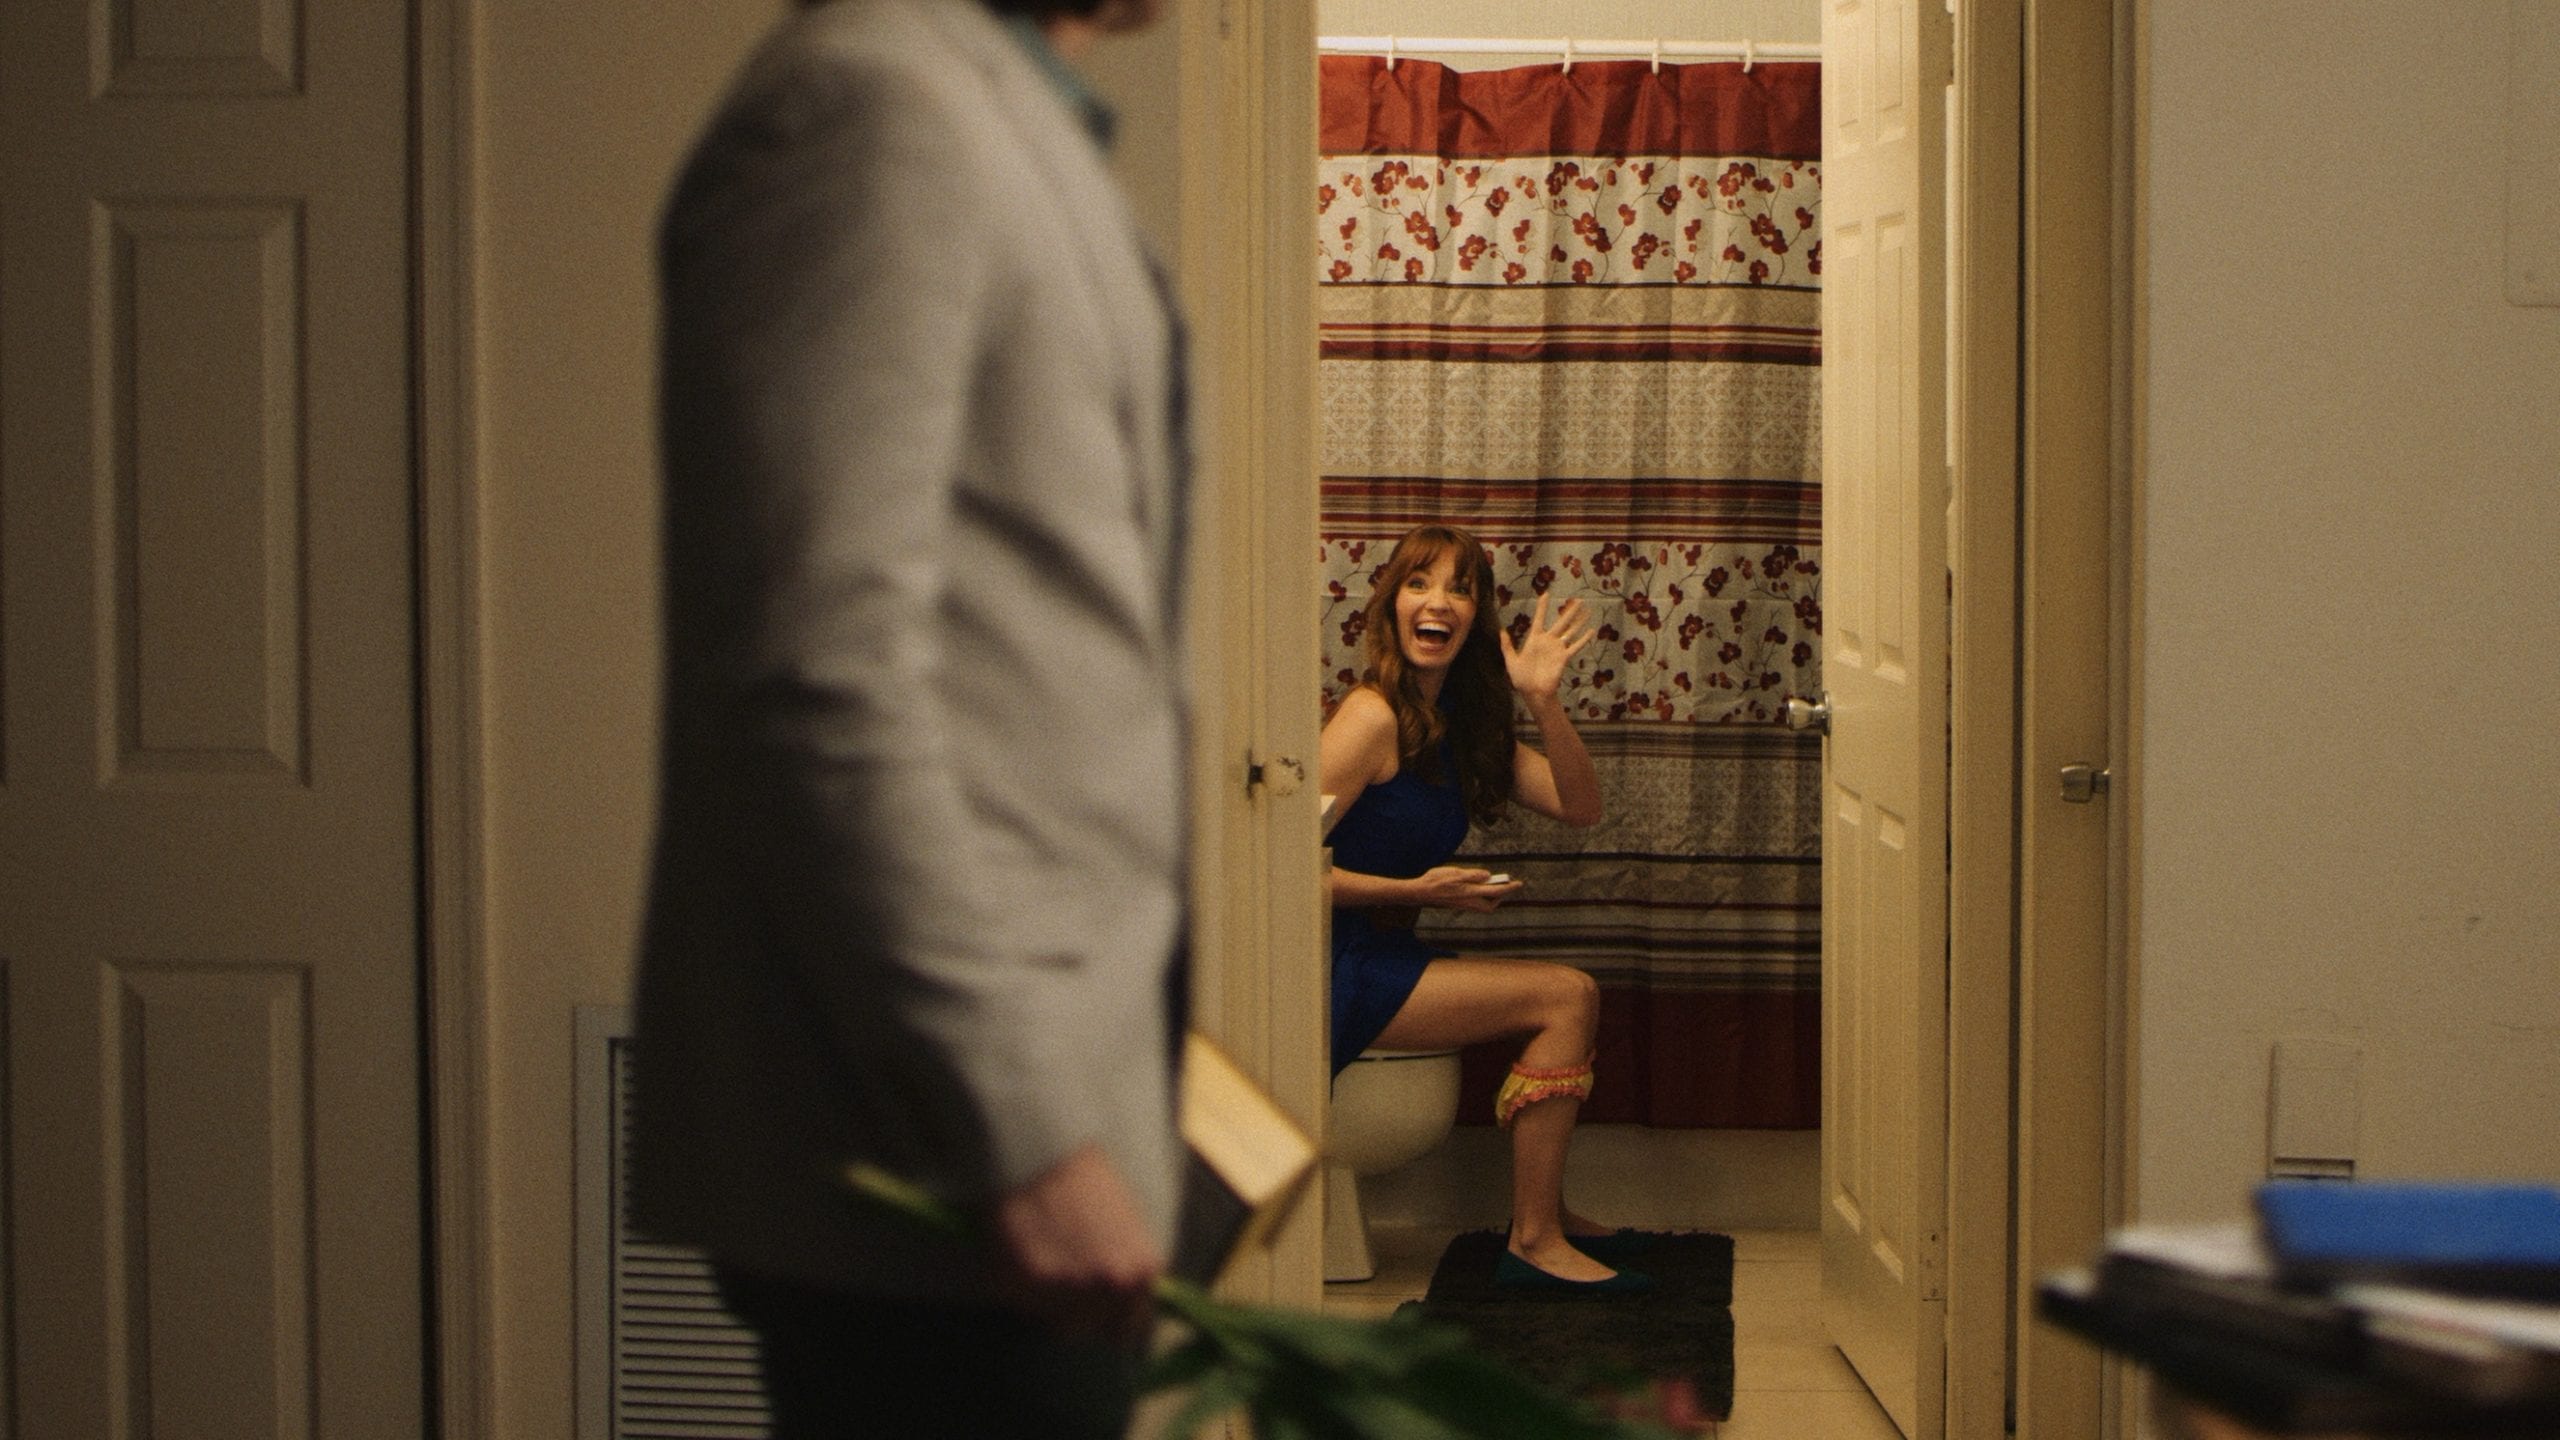 Poop Man in a gray suit carrying a box of Whitman's Chocolates and flowers walking past a bathroom with a woman sitting on the toilet waving and smiling